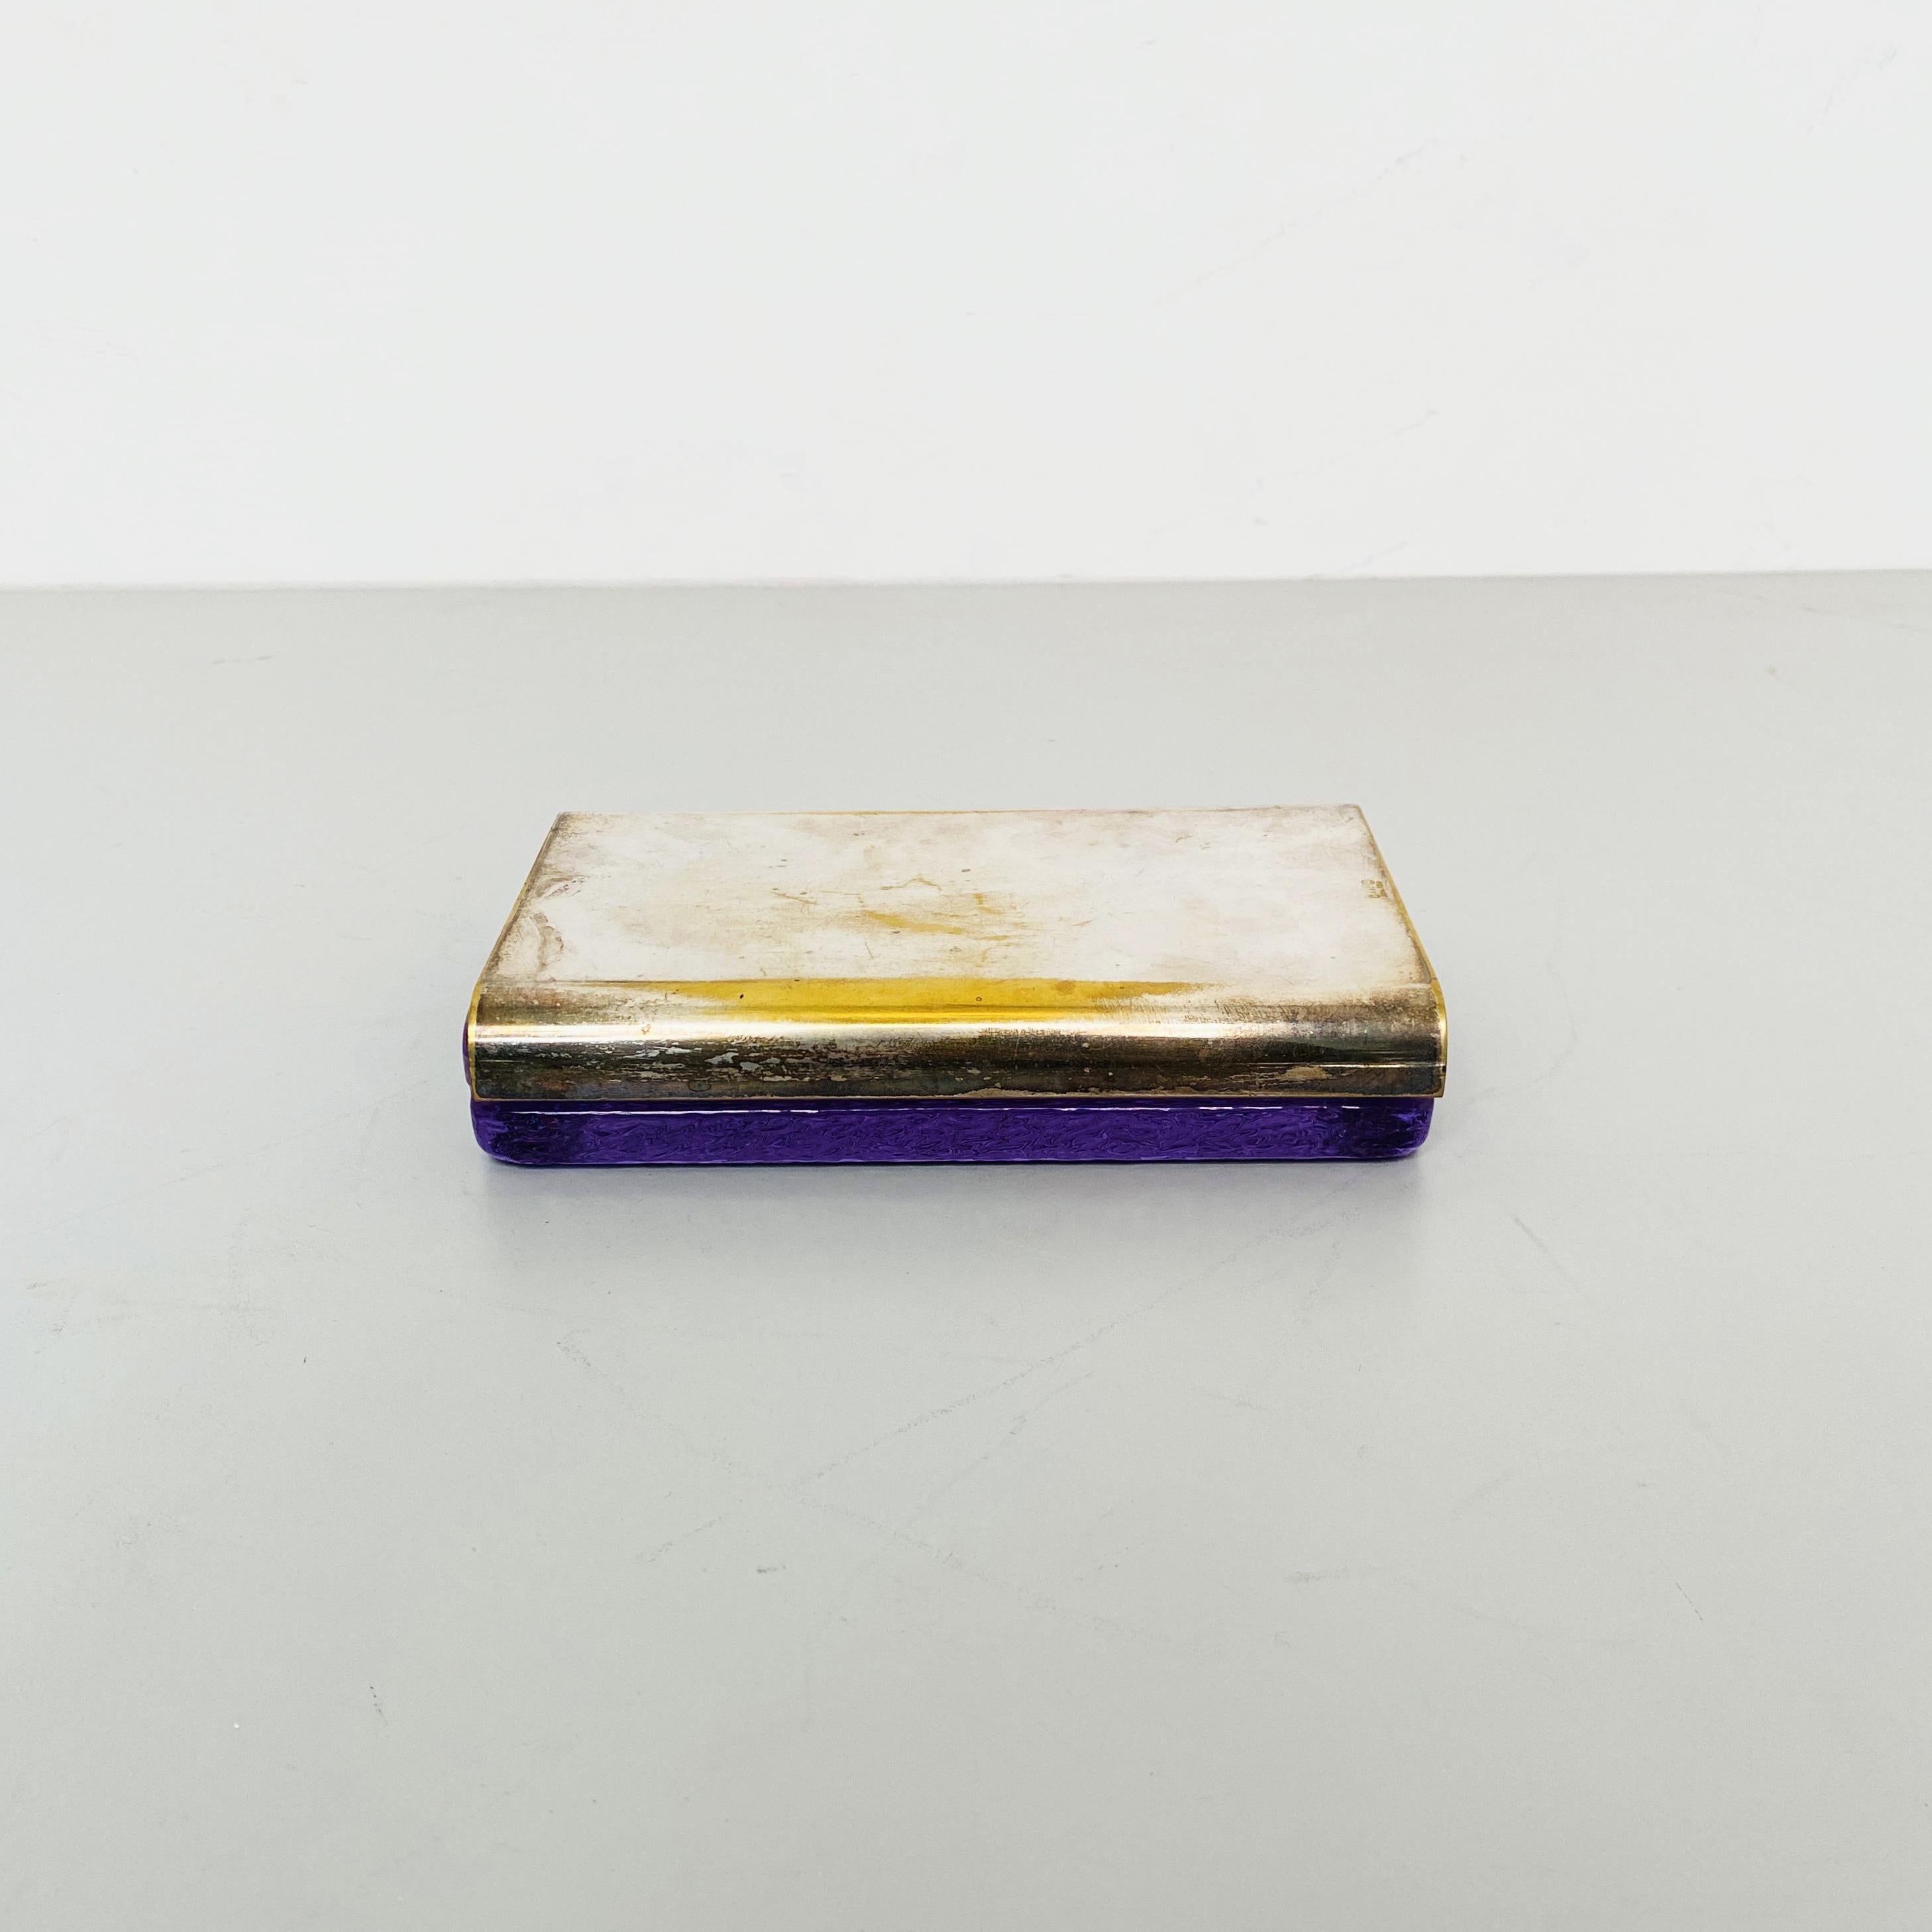 Italian mid-century Purple crystal smoking box by Colombo Arnolfo Di Cambio, 1969
Cigarette or cigar box with purple pressed crystal container and silver cover.
Produced by Arnolfo Di Cambio and designed by Joe Colombo in 1969, part of the Biglia